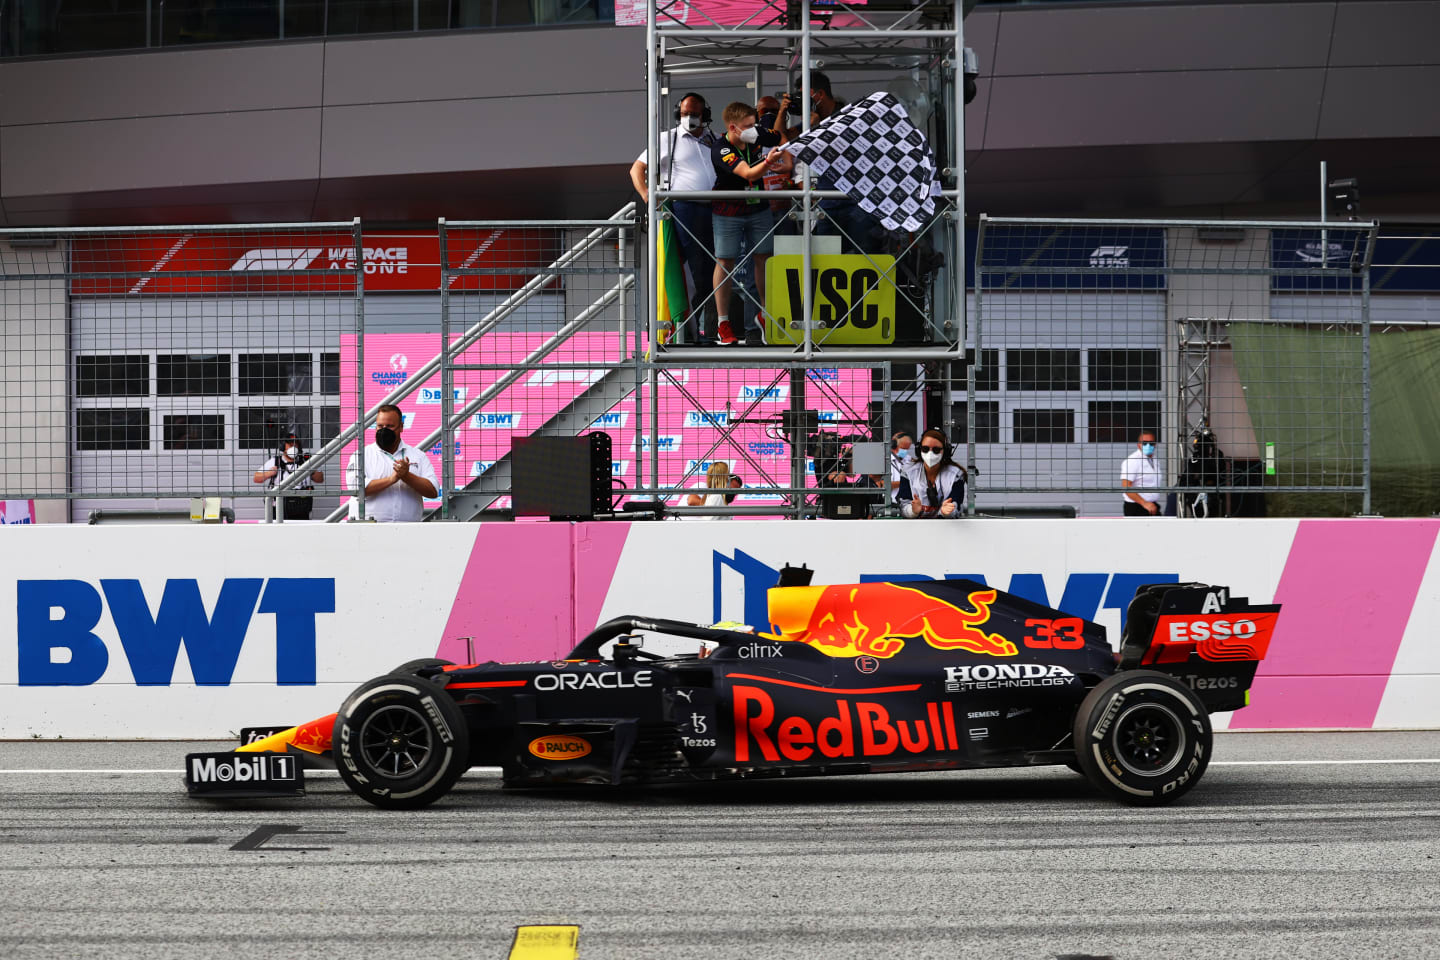 SPIELBERG, AUSTRIA - JUNE 27: Race winner Max Verstappen of the Netherlands driving the (33) Red Bull Racing RB16B Honda takes the chequered flag during the F1 Grand Prix of Styria at Red Bull Ring on June 27, 2021 in Spielberg, Austria. (Photo by Bryn Lennon/Getty Images)